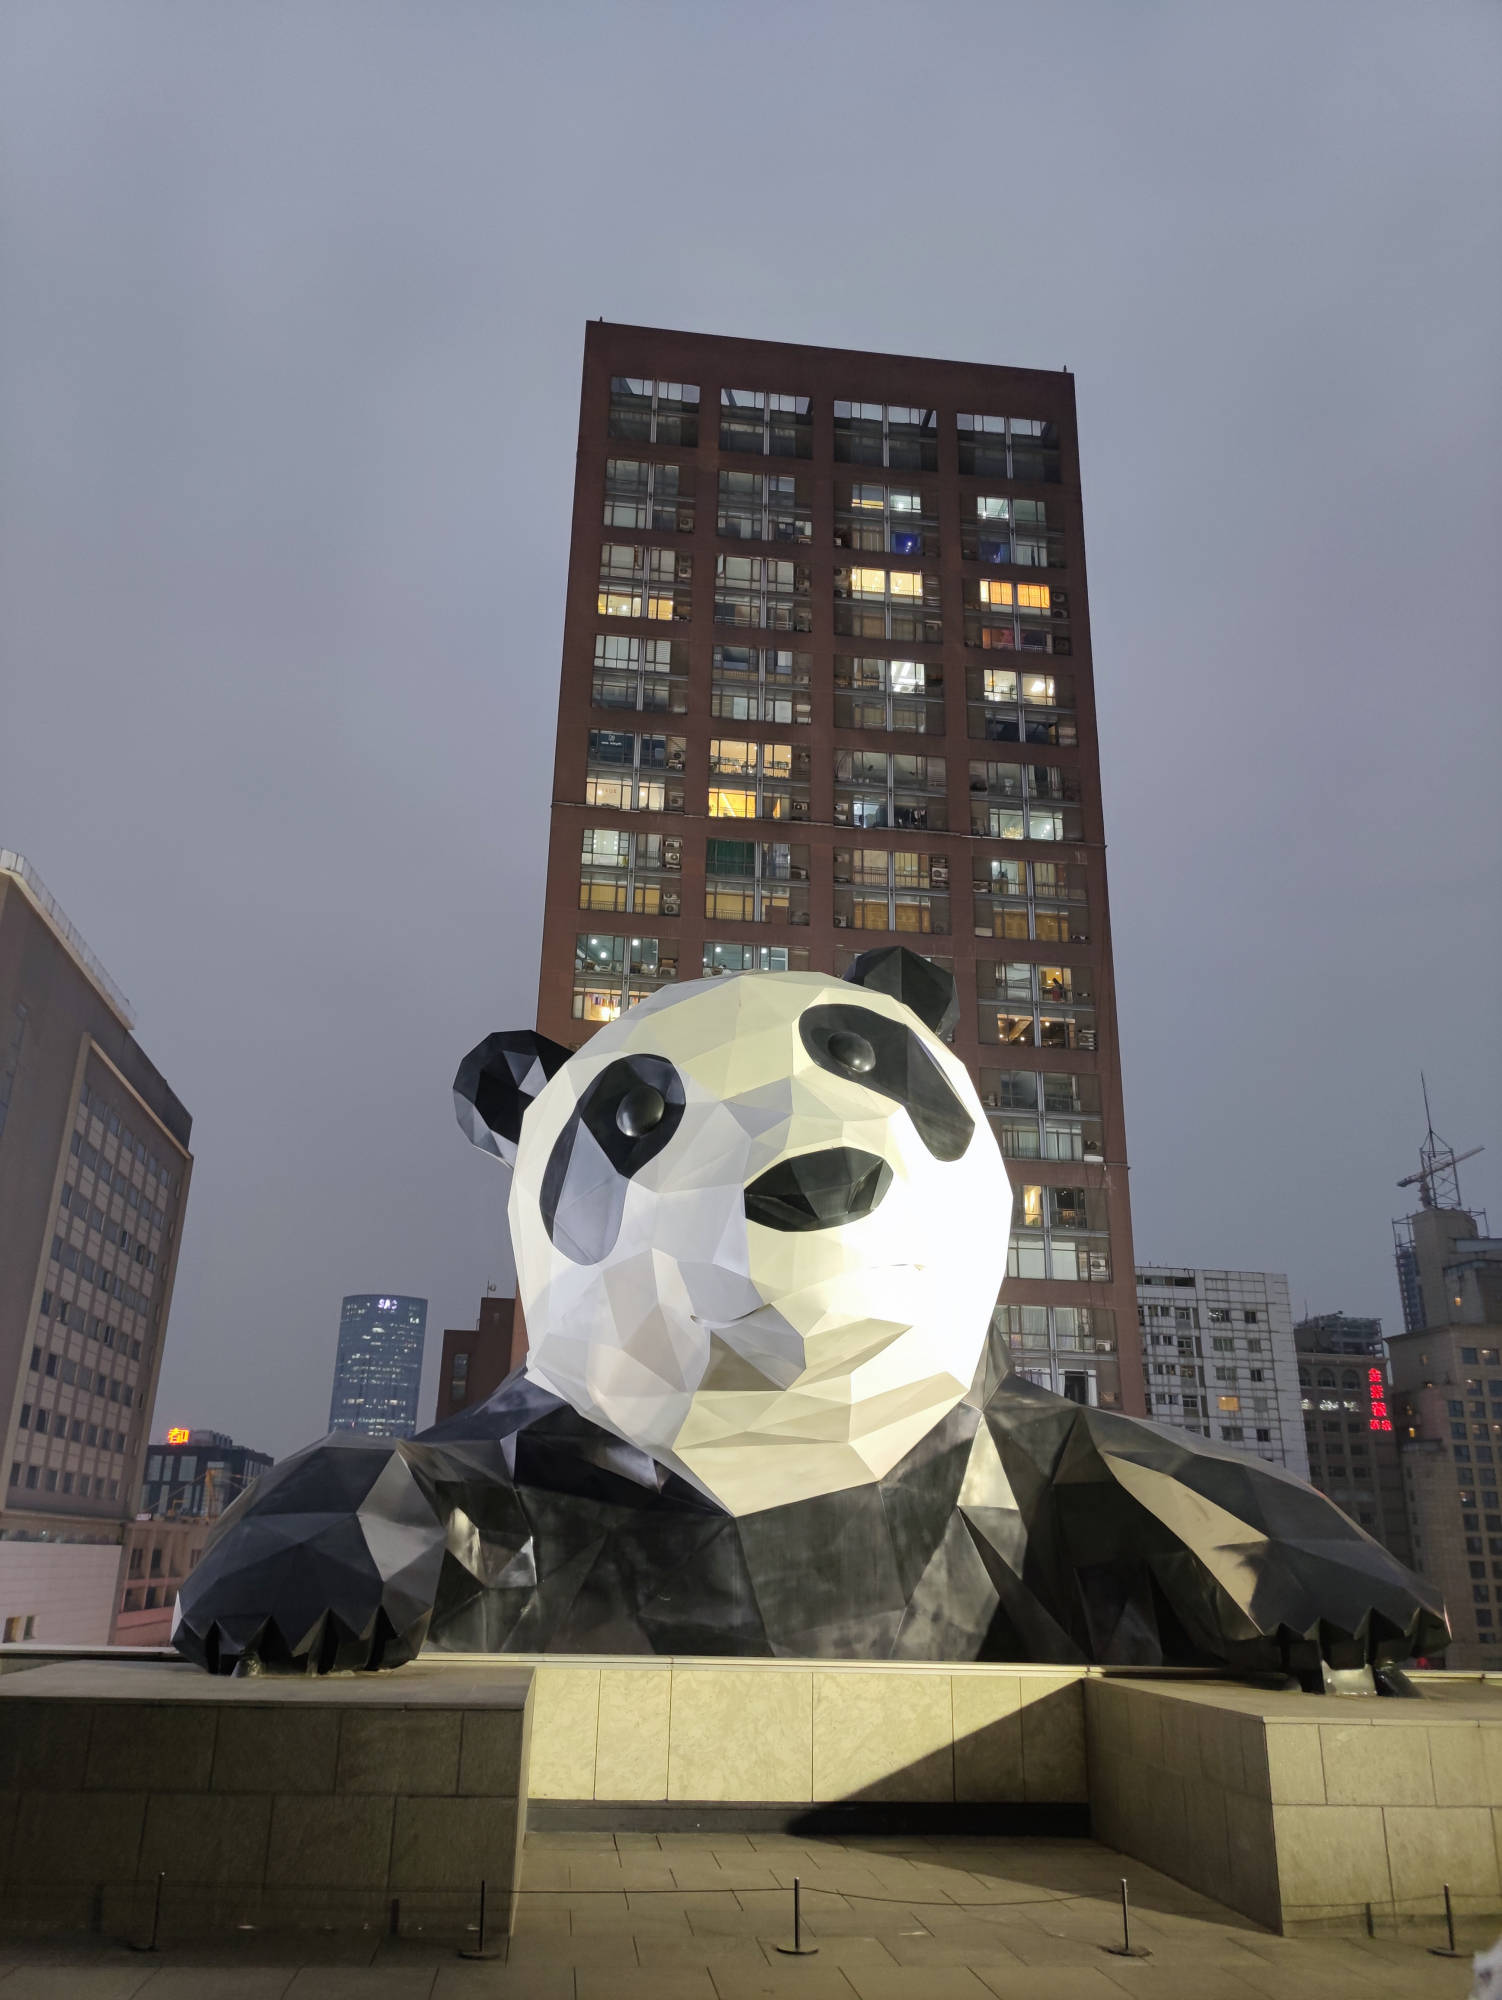 Chimelong to open panda-themed hotel - News - The Jakarta Post